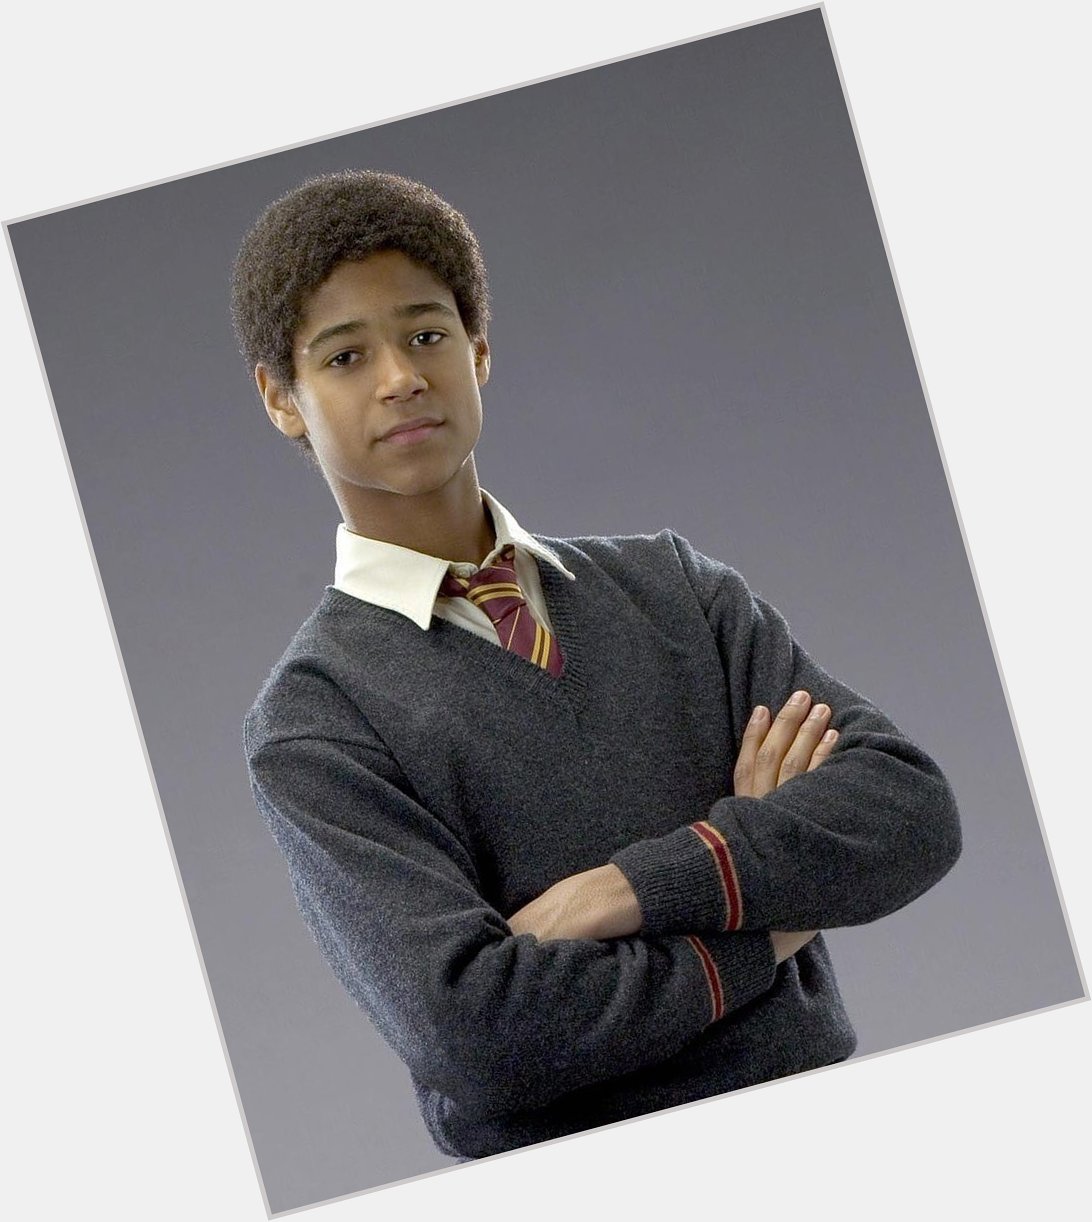 Wishing a happy birthday to (Alfred Enoch) our very own 